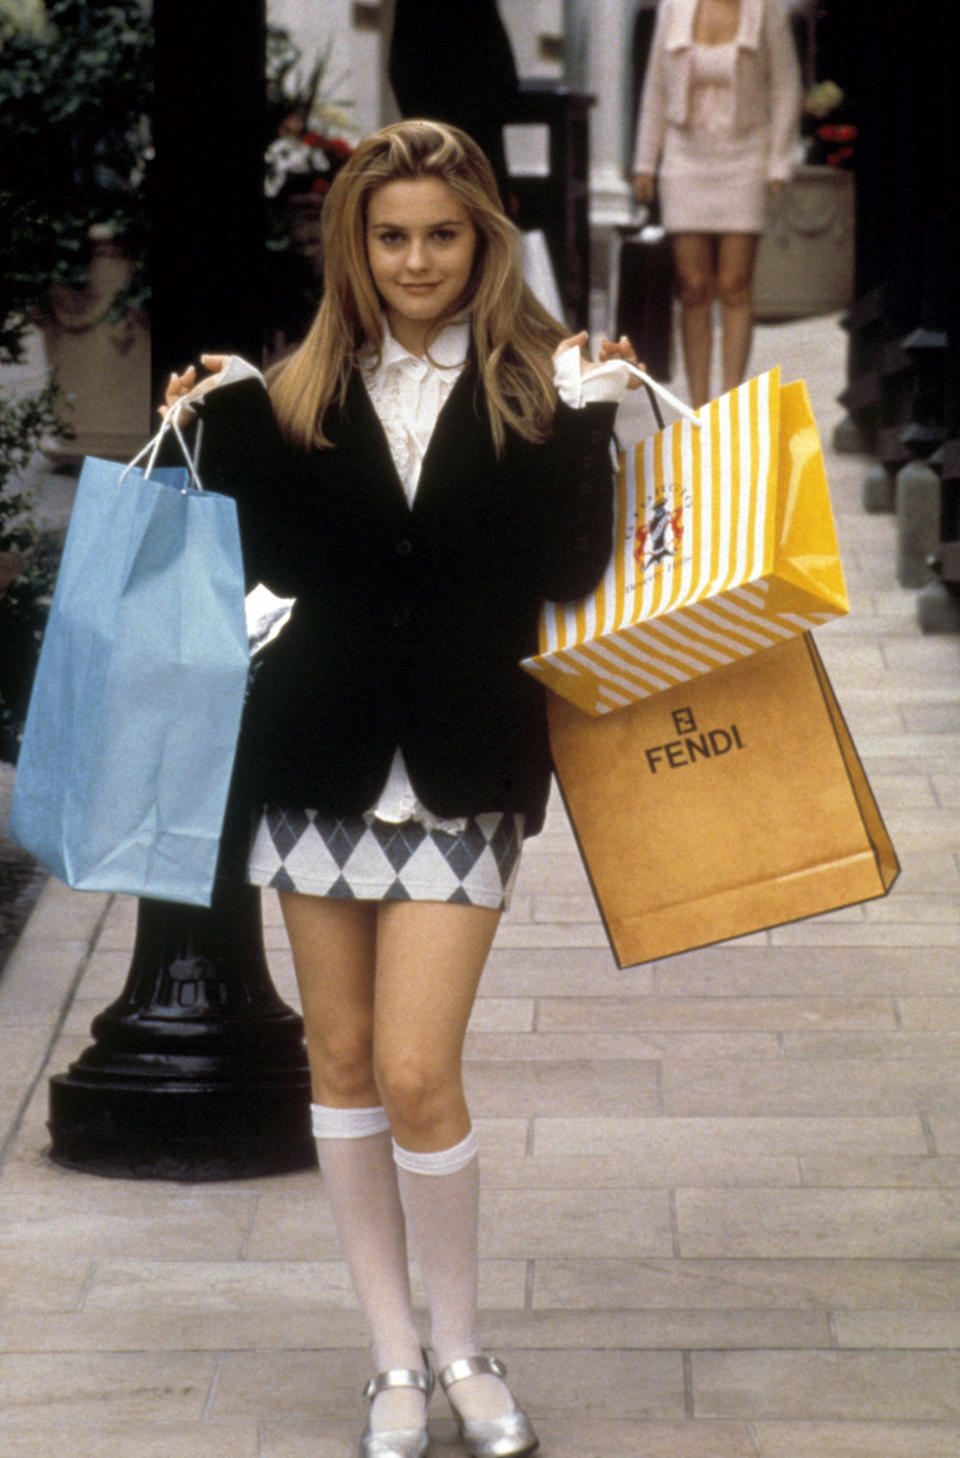 “Clueless,” Alicia Silverstone, 1995, (c) Paramount/courtesy Everett Collection. - Credit: ©Paramount/Courtesy Everett Collection